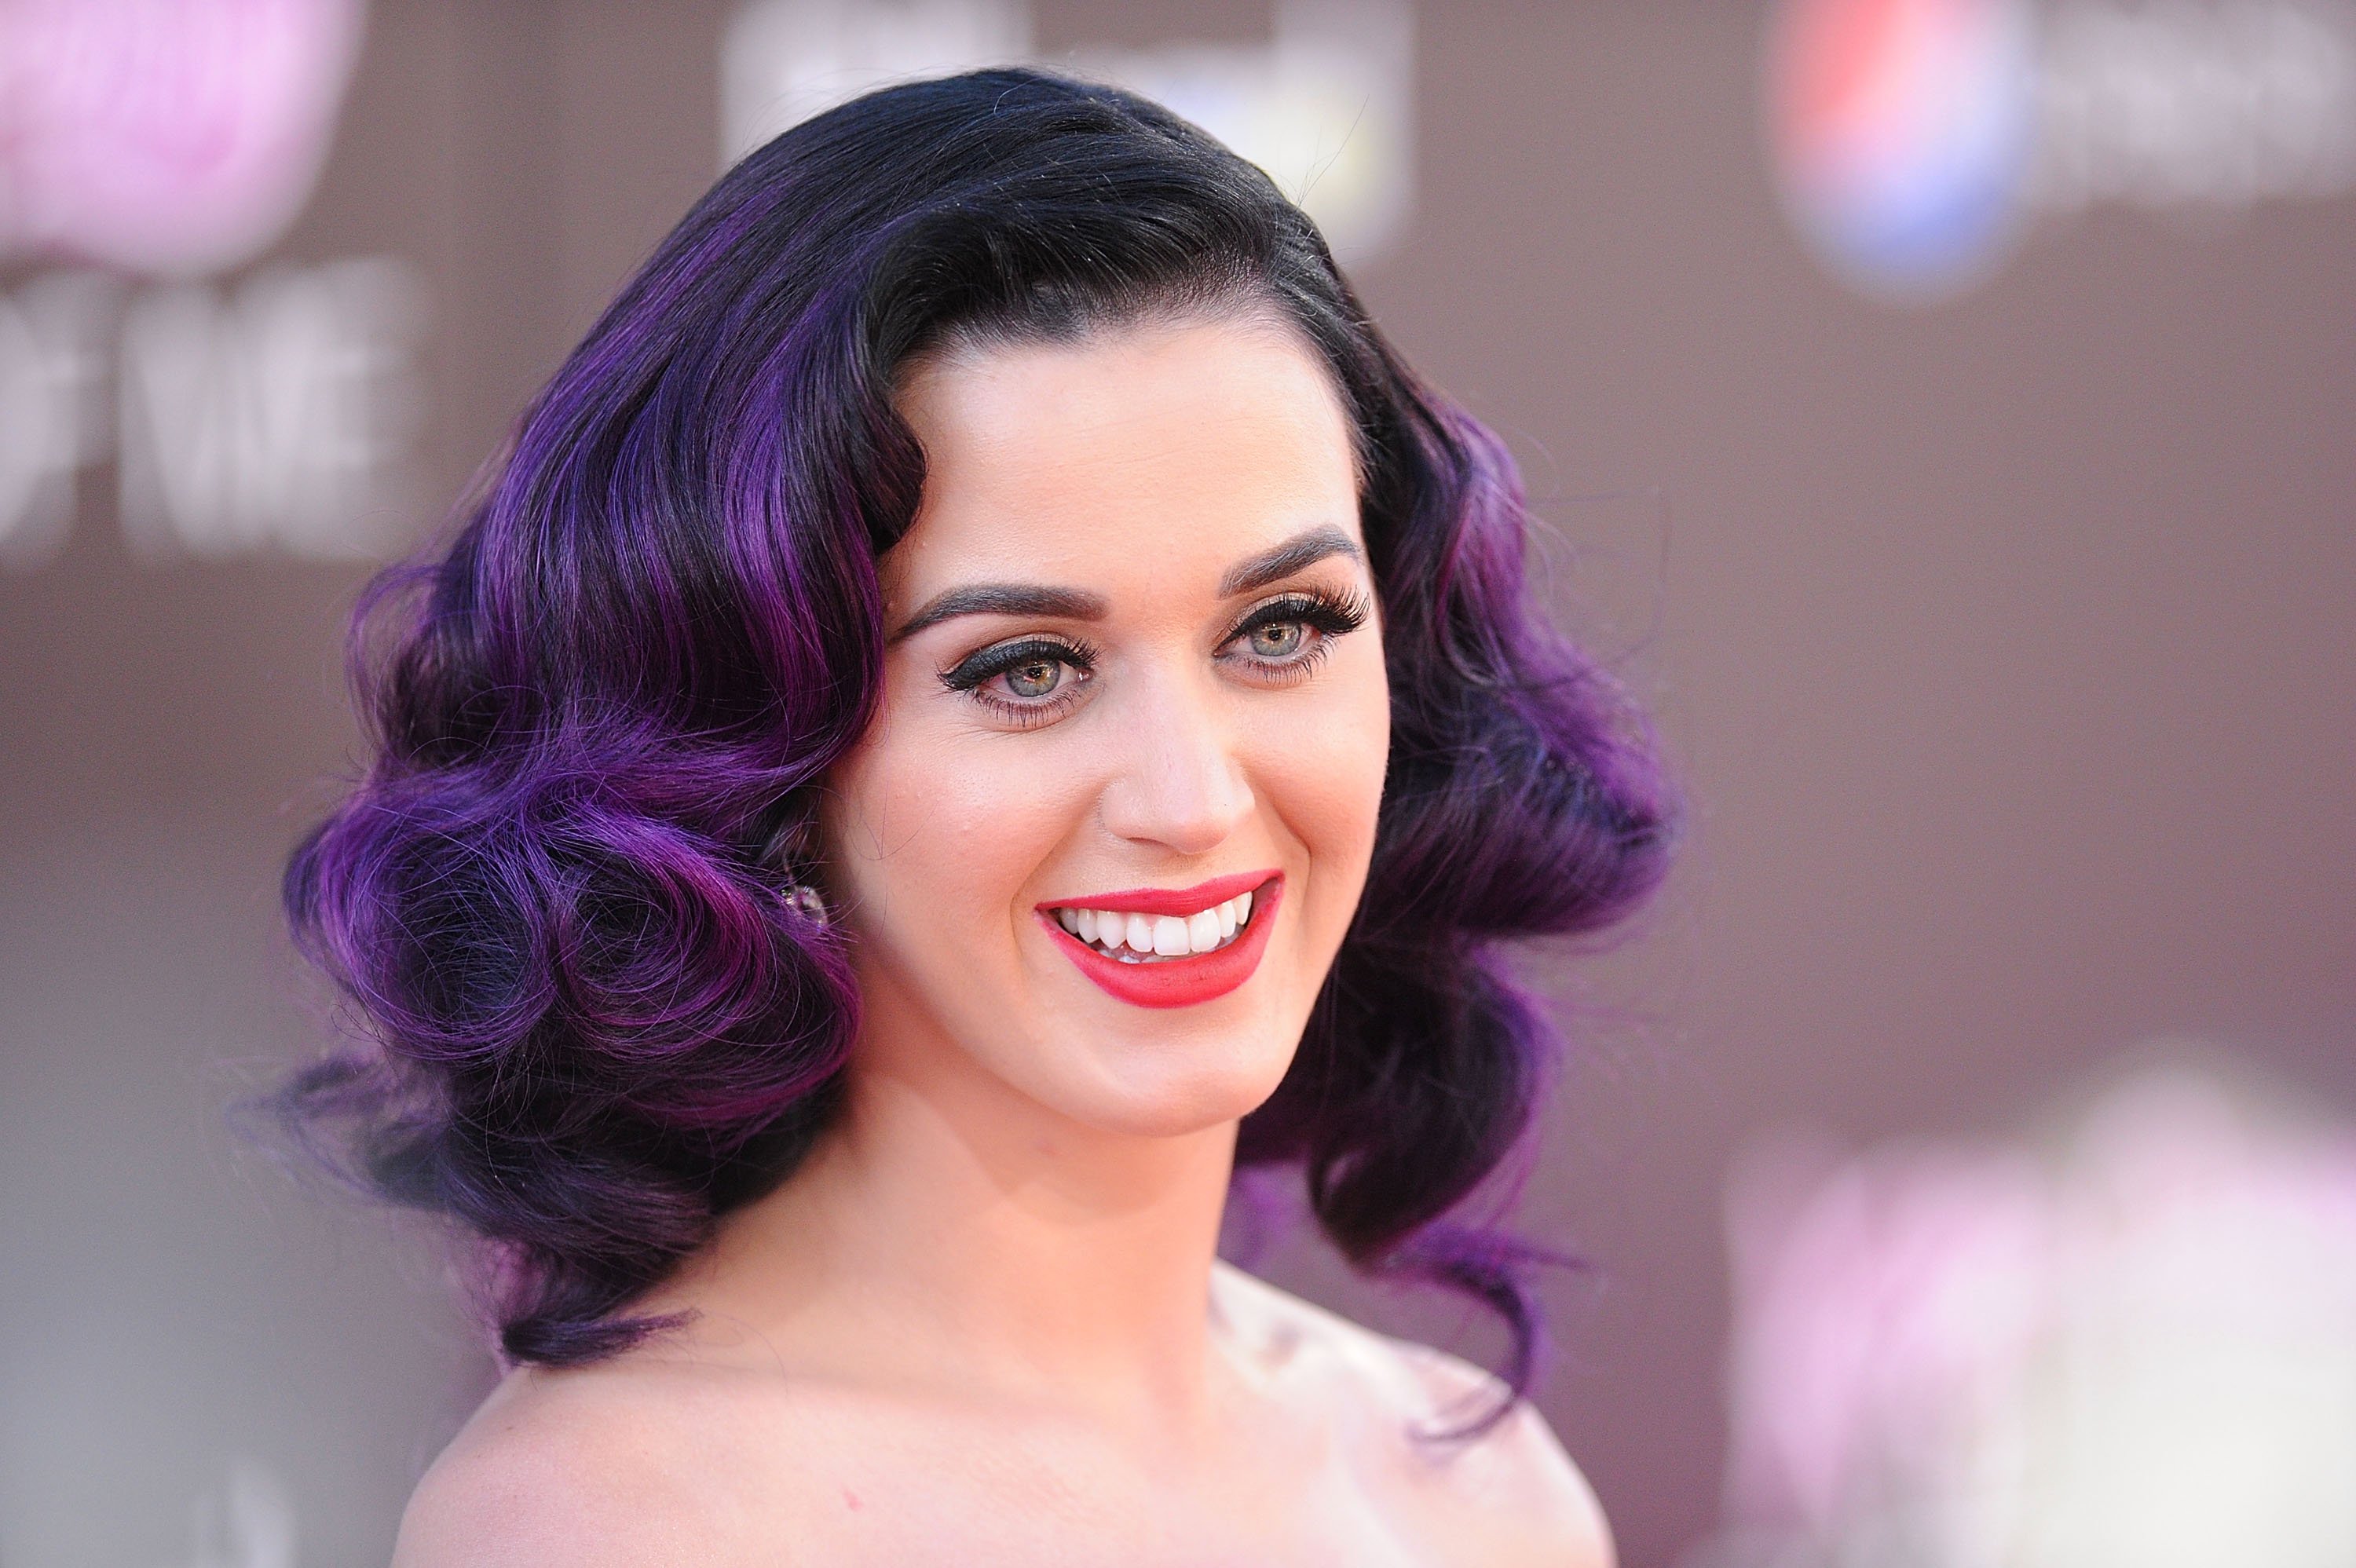 Katy Perry with purple hair